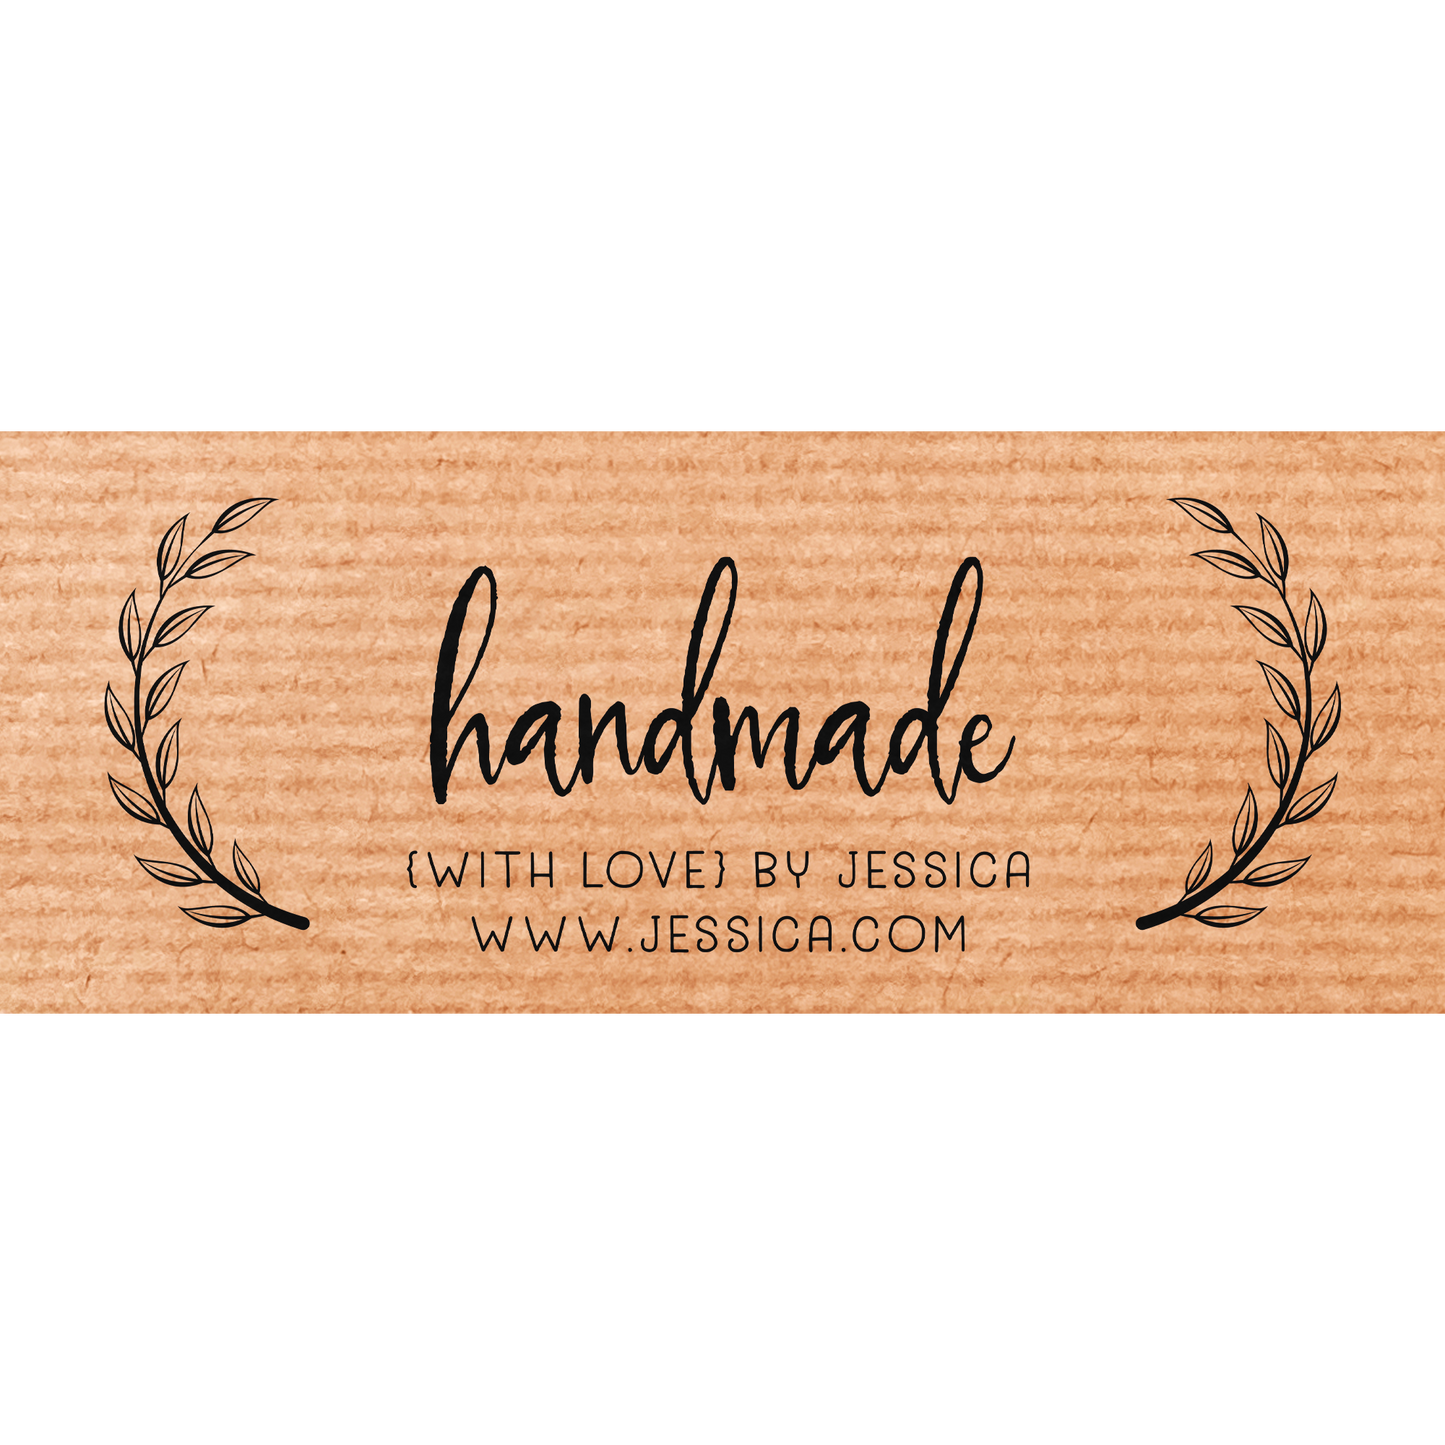 Handmade with love personalized kraft stickers, with brand namde and website - XOXOKristen